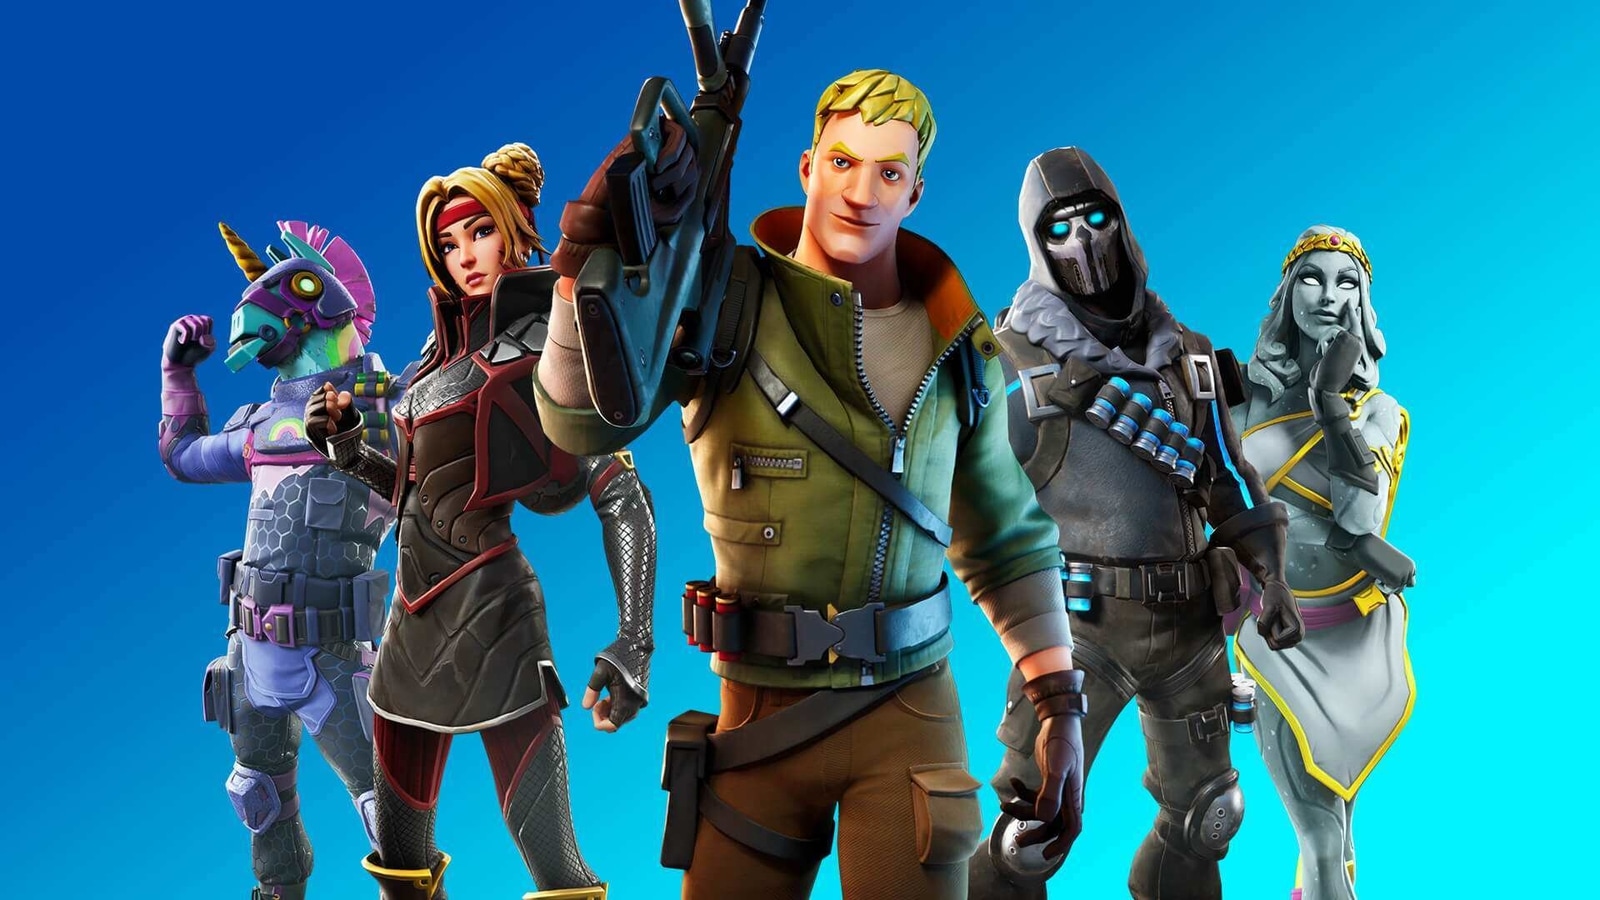 How to Get 'Fortnite' on an Android With a Workaround